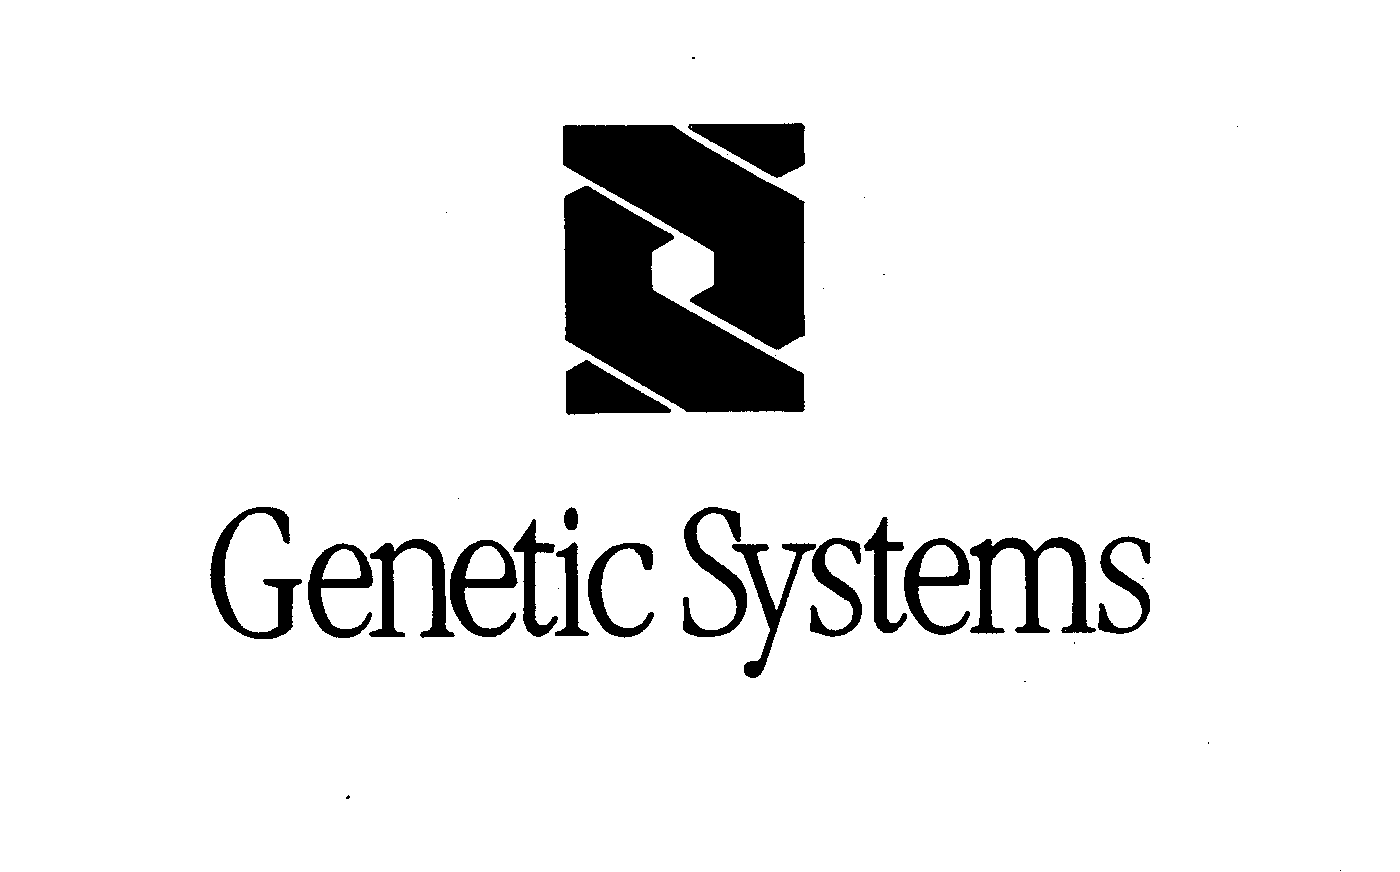  GENETIC SYSTEMS